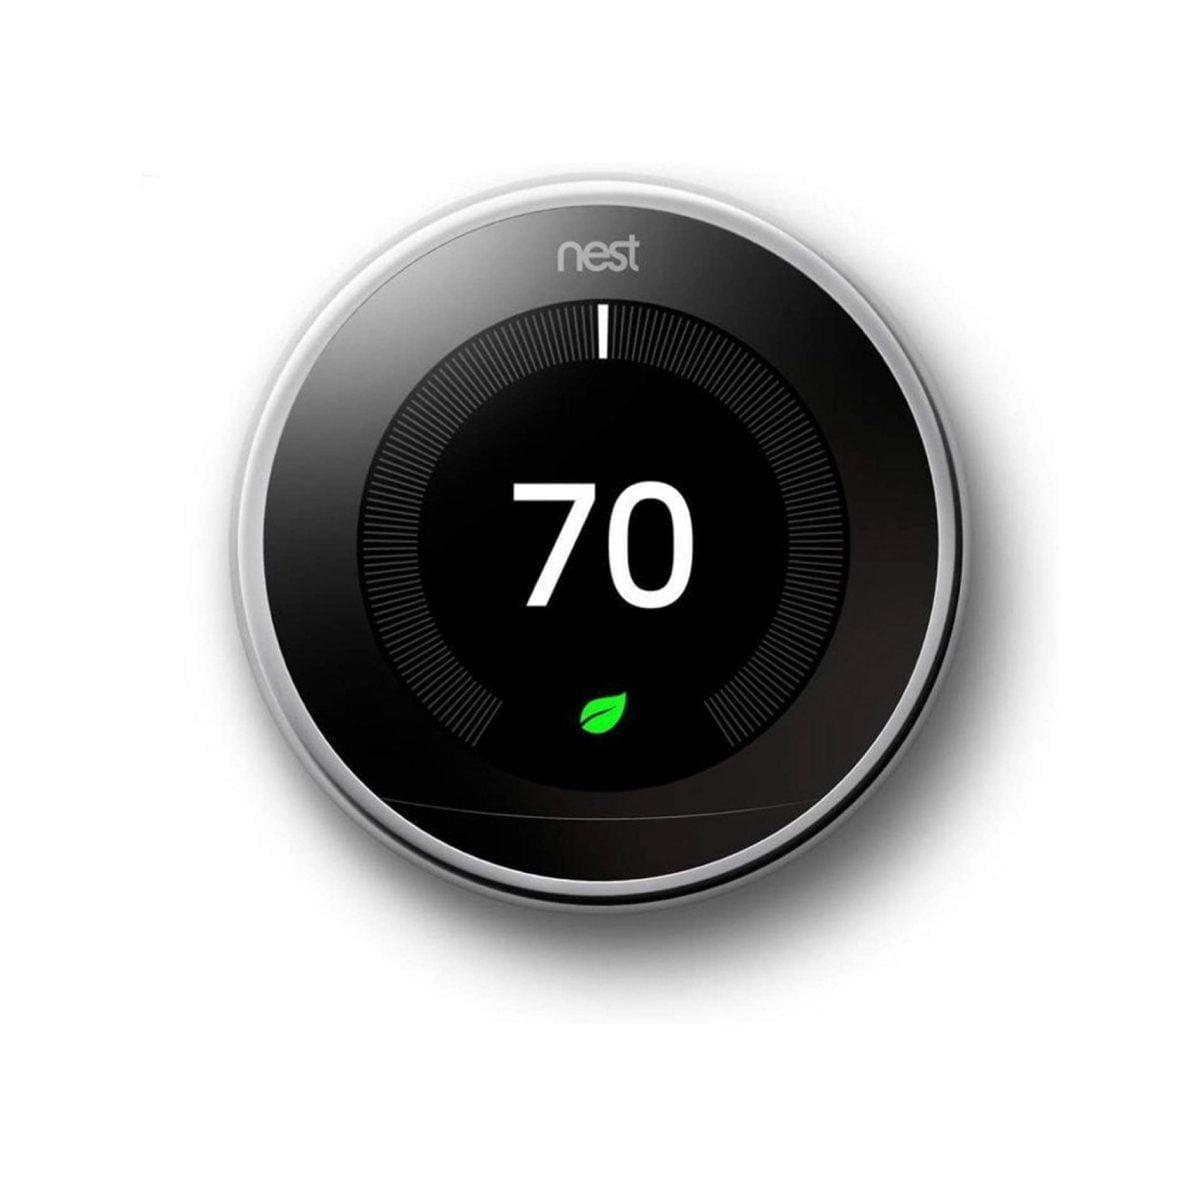 Wwwewe 02 Scaled Google &Lt;H1&Gt;Google Nest Learning Smart Wifi Thermostat 3Rd Gen - T3019Us Polished Steel&Lt;/H1&Gt; &Lt;Ul Class=&Quot;A-Unordered-List A-Vertical A-Spacing-Mini&Quot;&Gt; &Lt;Li&Gt;&Lt;Span Class=&Quot;A-List-Item&Quot;&Gt;Auto-Schedule: No More Confusing Programming. It Learns The Temperatures You Like And Programs Itself.&Lt;/Span&Gt;&Lt;/Li&Gt; &Lt;Li&Gt;&Lt;Span Class=&Quot;A-List-Item&Quot;&Gt;Wi-Fi Thermostat: Connect The Nest Thermostat To Wi-Fi To Change The Temperature From Your Phone, Tablet Or Laptop.&Lt;/Span&Gt;&Lt;/Li&Gt; &Lt;Li&Gt;&Lt;Span Class=&Quot;A-List-Item&Quot;&Gt;Energy Saving: You’ll See The Nest Leaf When You Choose A Temperature That Saves Energy. It Guides You In The Right Direction.&Lt;/Span&Gt;&Lt;/Li&Gt; &Lt;Li&Gt;&Lt;Span Class=&Quot;A-List-Item&Quot;&Gt;Smart Thermostat: Early-On Nest Learns How Your Home Warms Up And Keeps An Eye On The Weather To Get You The Temperature You Want When You Want It.&Lt;/Span&Gt;&Lt;/Li&Gt; &Lt;Li&Gt;&Lt;Span Class=&Quot;A-List-Item&Quot;&Gt;Home/Away Assist: The Nest Thermostat Automatically Turns Itself Down When You’re Away To Avoid Heating Or Cooling An Empty Home.&Lt;/Span&Gt;&Lt;/Li&Gt; &Lt;Li&Gt;&Lt;Span Class=&Quot;A-List-Item&Quot;&Gt;Works With Amazon Alexa For Voice Control (Alexa Device Sold Separately)&Lt;/Span&Gt;&Lt;/Li&Gt; &Lt;Li&Gt;&Lt;Span Class=&Quot;A-List-Item&Quot;&Gt;&Lt;Span Class=&Quot;A-List-Item&Quot;&Gt;Auto-Schedule: Nest Learns The Temperatures You Like And Programs Itself In About A Week.&Lt;/Span&Gt;&Lt;/Span&Gt; &Lt;H5&Gt;Note : Direct Replacement Warranty One Year&Lt;/H5&Gt; &Lt;Div Class=&Quot;Html-Fragment&Quot;&Gt; &Lt;Div&Gt; &Lt;B&Gt;We Also Provide International Wholesale And Retail Shipping To All Gcc Countries: Saudi Arabia, Qatar, Oman, Kuwait, Bahrain.&Lt;/B&Gt; &Lt;/Div&Gt; &Lt;/Div&Gt;&Lt;/Li&Gt; &Lt;/Ul&Gt; &Lt;Div Class=&Quot;A-Row A-Expander-Container A-Expander-Inline-Container&Quot; Aria-Live=&Quot;Polite&Quot;&Gt; &Lt;Div Class=&Quot;A-Expander-Content A-Expander-Extend-Content A-Expander-Content-Expanded&Quot; Aria-Expanded=&Quot;True&Quot;&Gt;&Lt;/Div&Gt; &Lt;/Div&Gt; Google Nest Google Nest Learning Smart Wifi Thermostat 3Rd Gen - T3019Us Polished Steel